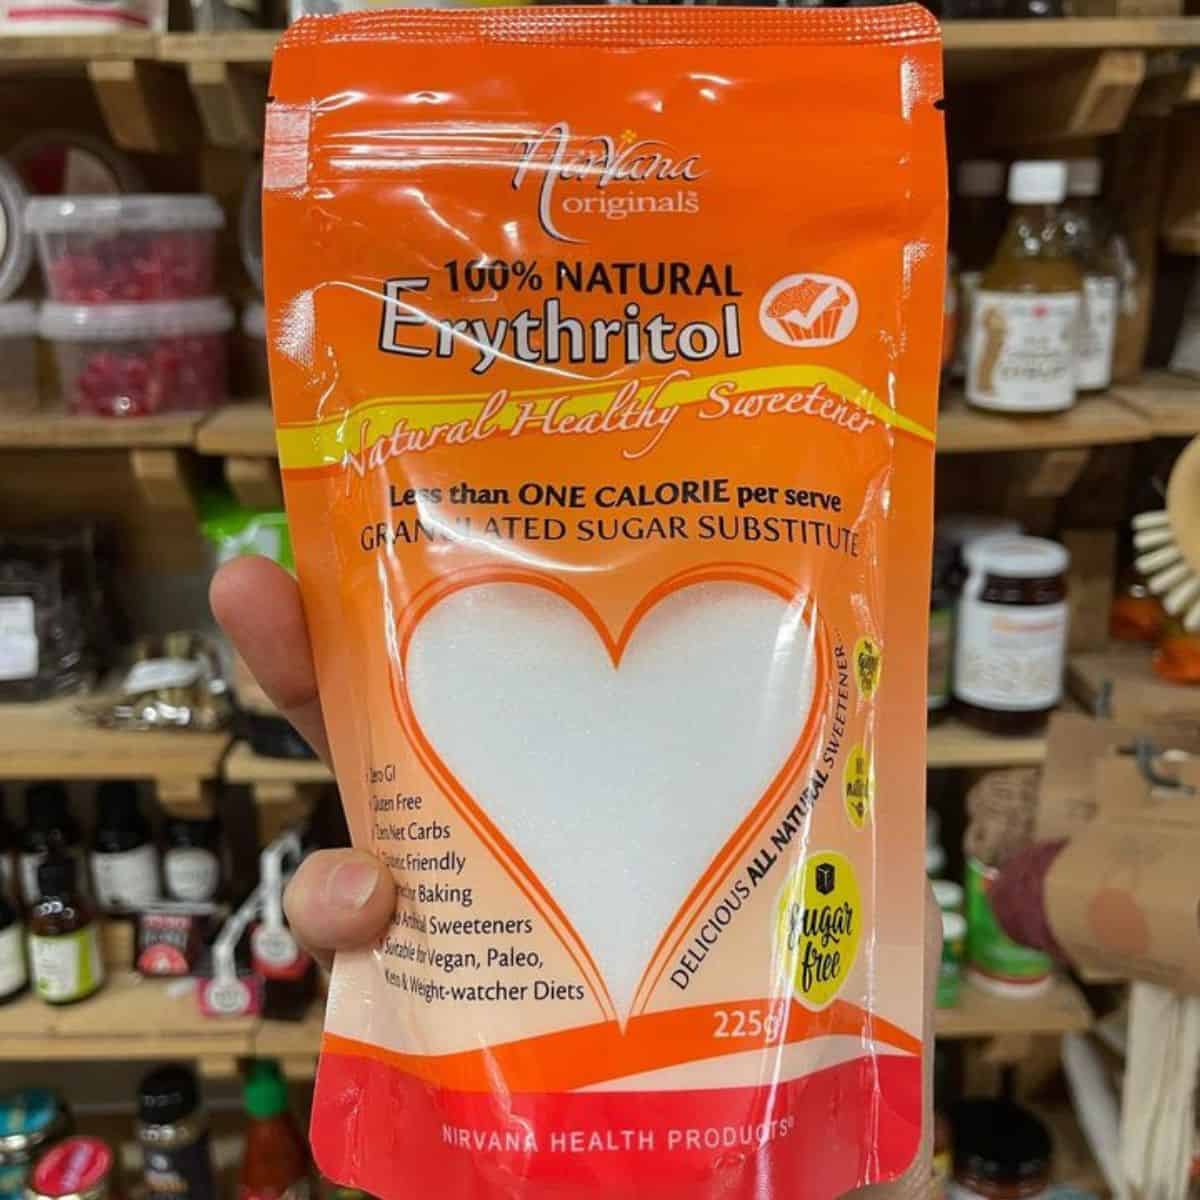 A hand holding erythritol in an orange packaging